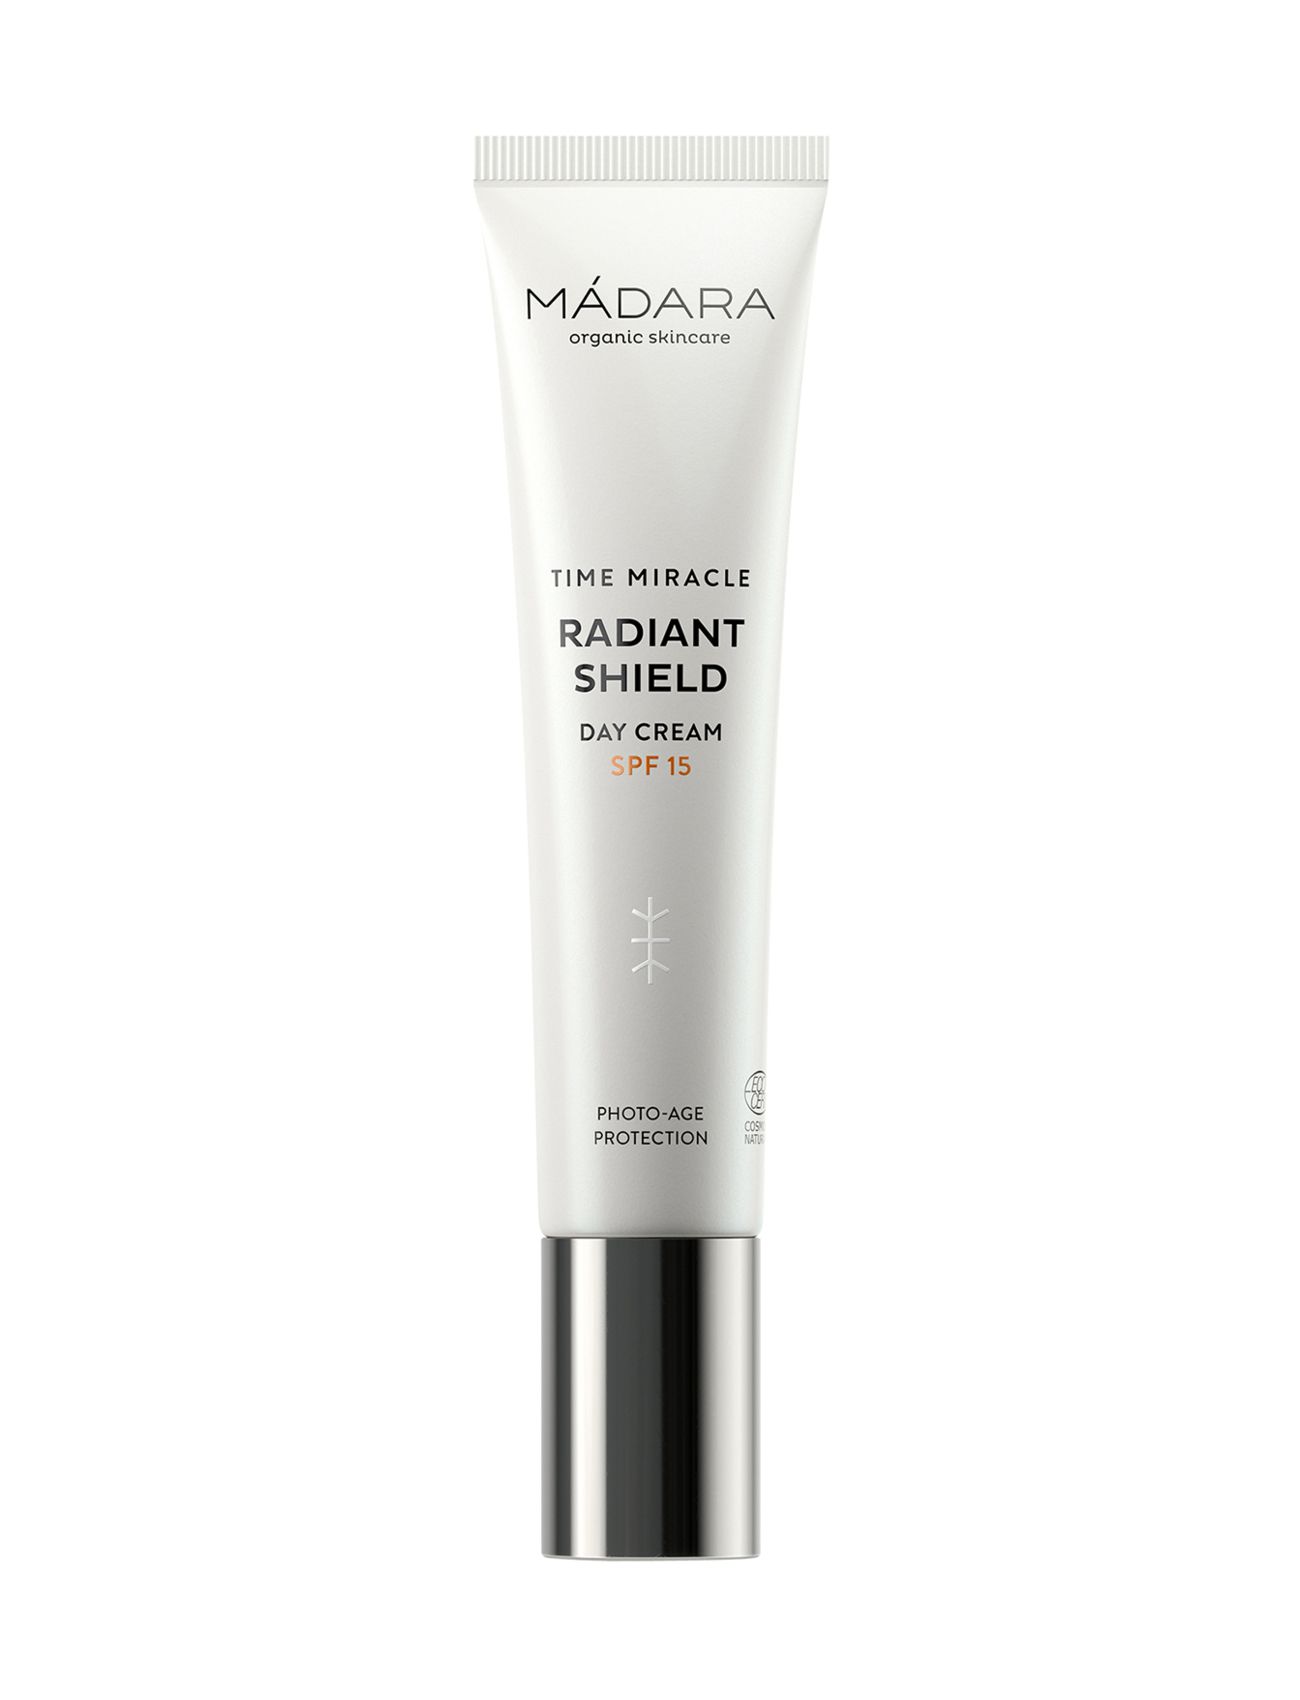 MáDara Time Miracle Radiant Shield Day Cream Spf15 40 Ml Beauty MEN Skin Care Sun Products Face Nude MÁDARA